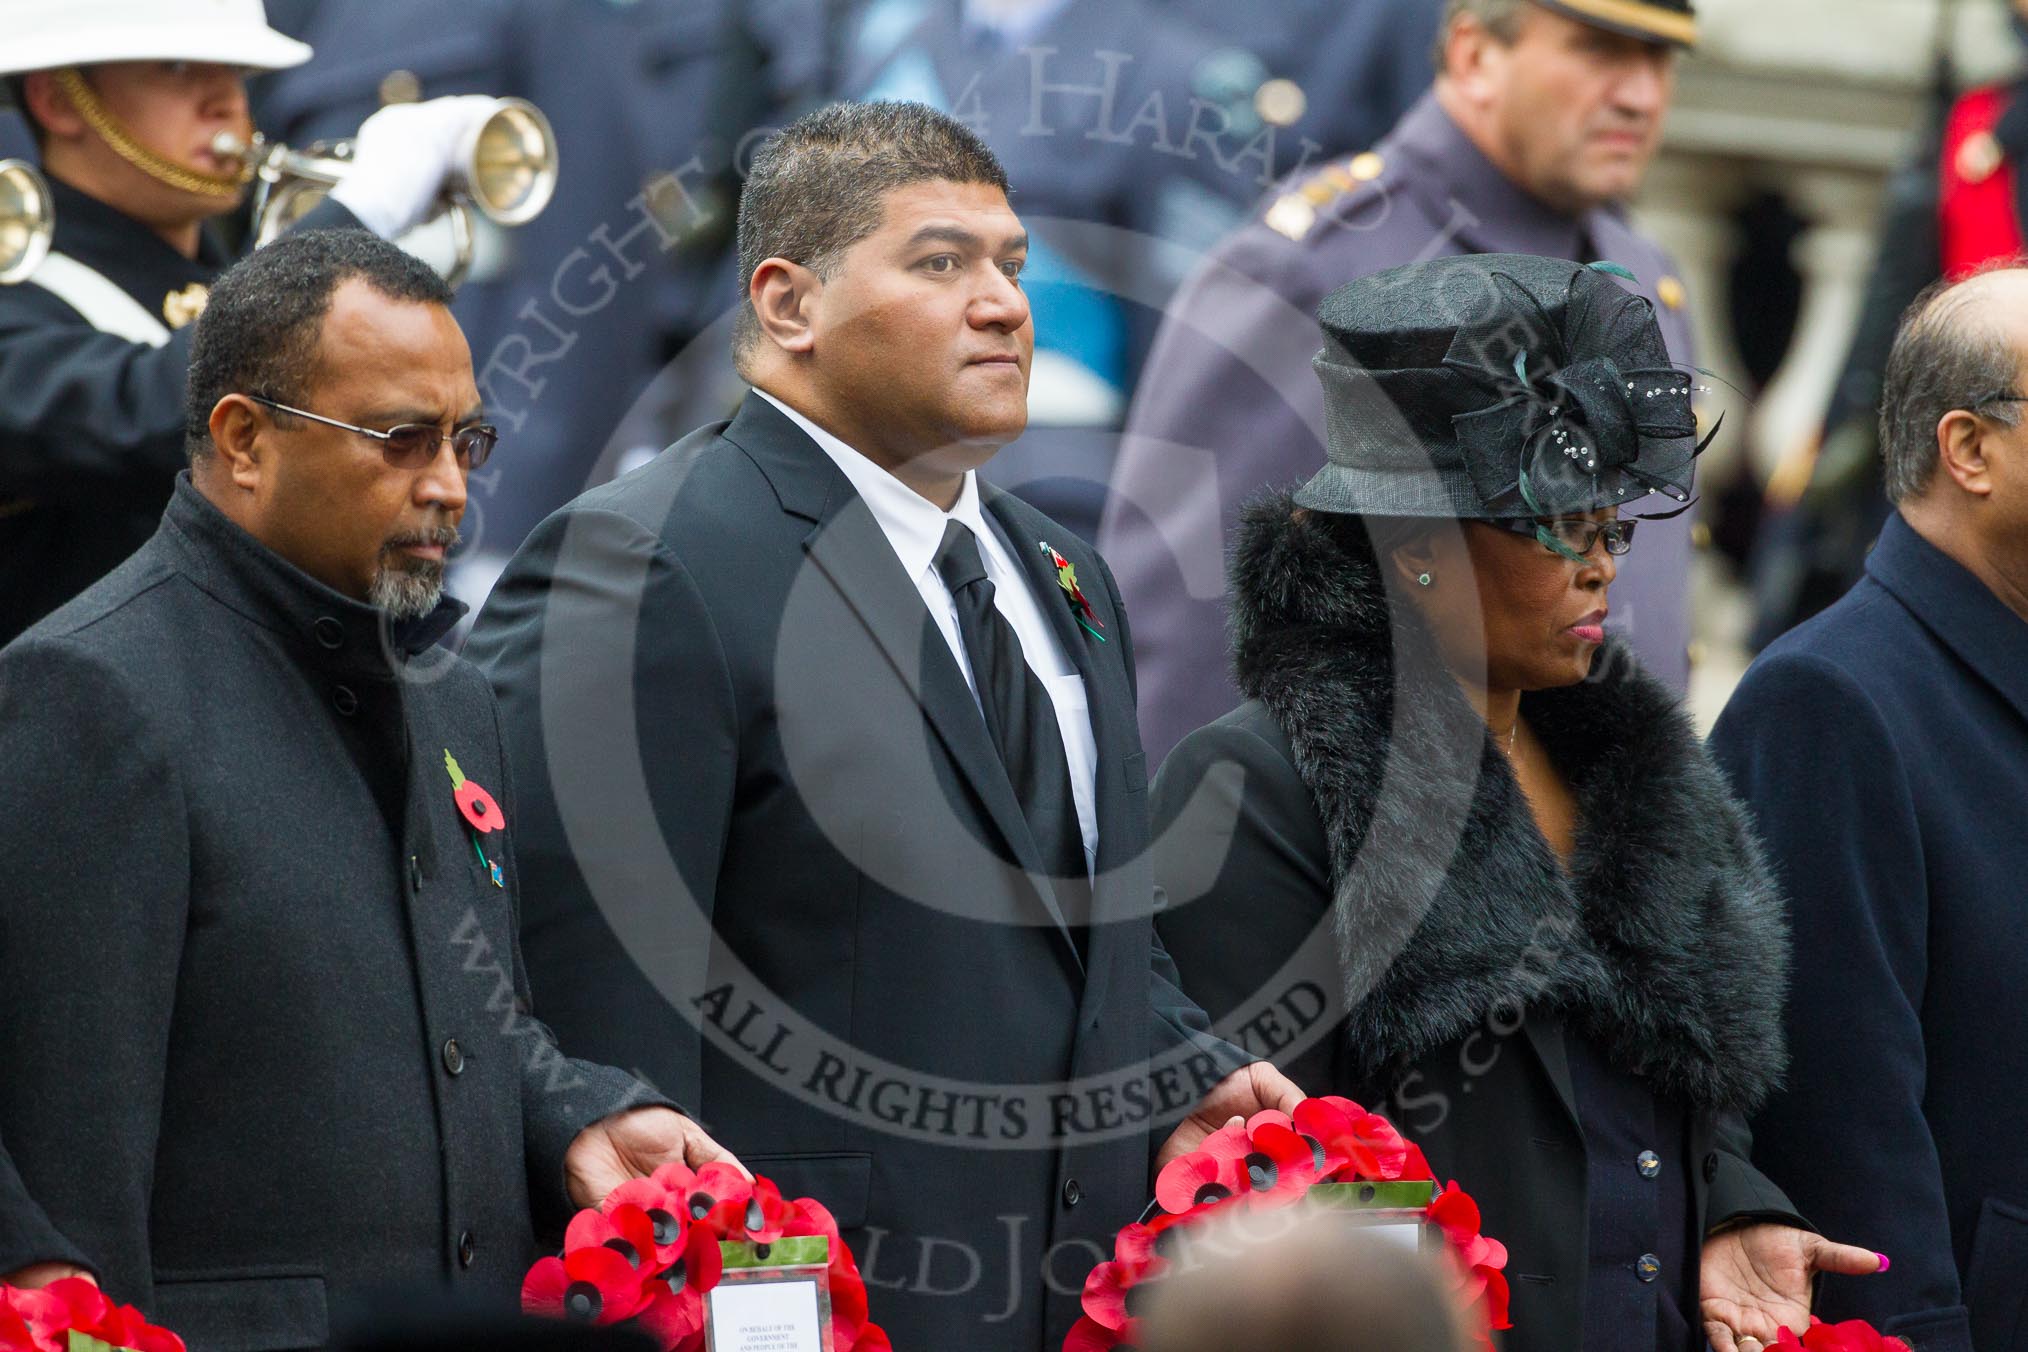 Remembrance Sunday at the Cenotaph in London 2014: The High Commissioner of Fiji, the High Commissioner of Tonga, and the High Commissioner of Swaziland with their wreaths at the Cenotaph.
Press stand opposite the Foreign Office building, Whitehall, London SW1,
London,
Greater London,
United Kingdom,
on 09 November 2014 at 11:03, image #178